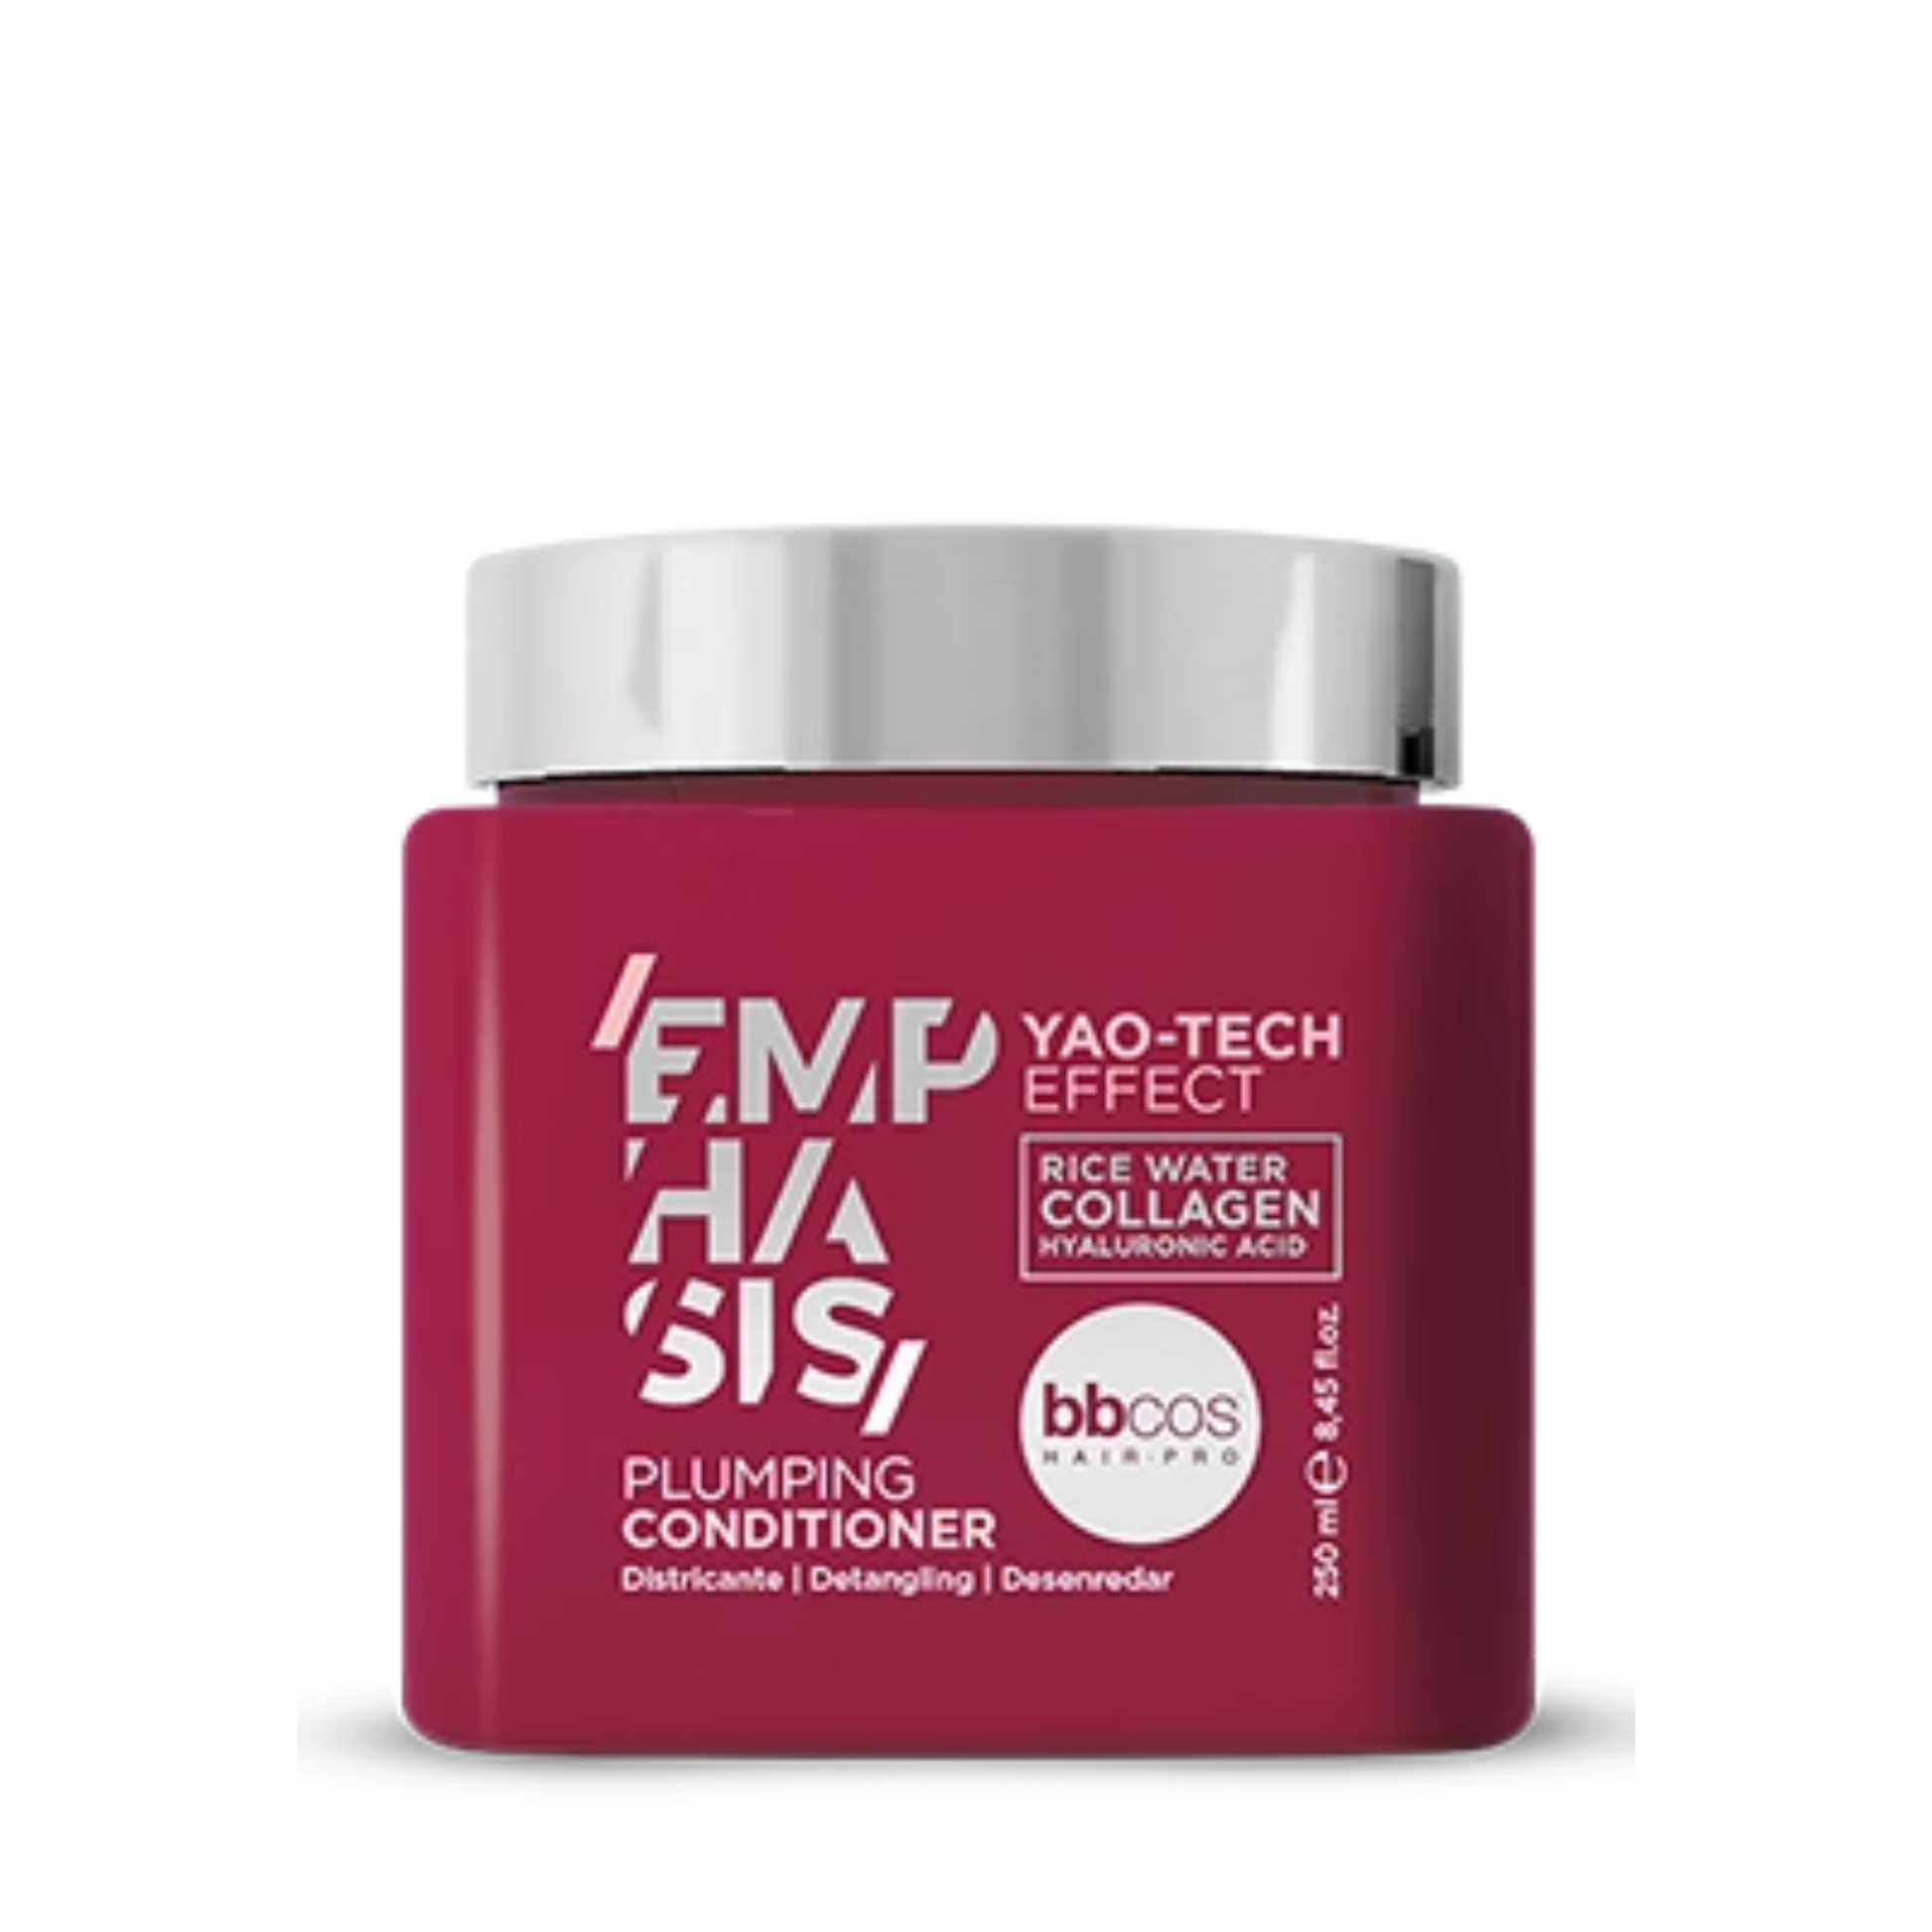 BBCOS Emphasis Yao-Tech Plumping Conditioner 250 ML